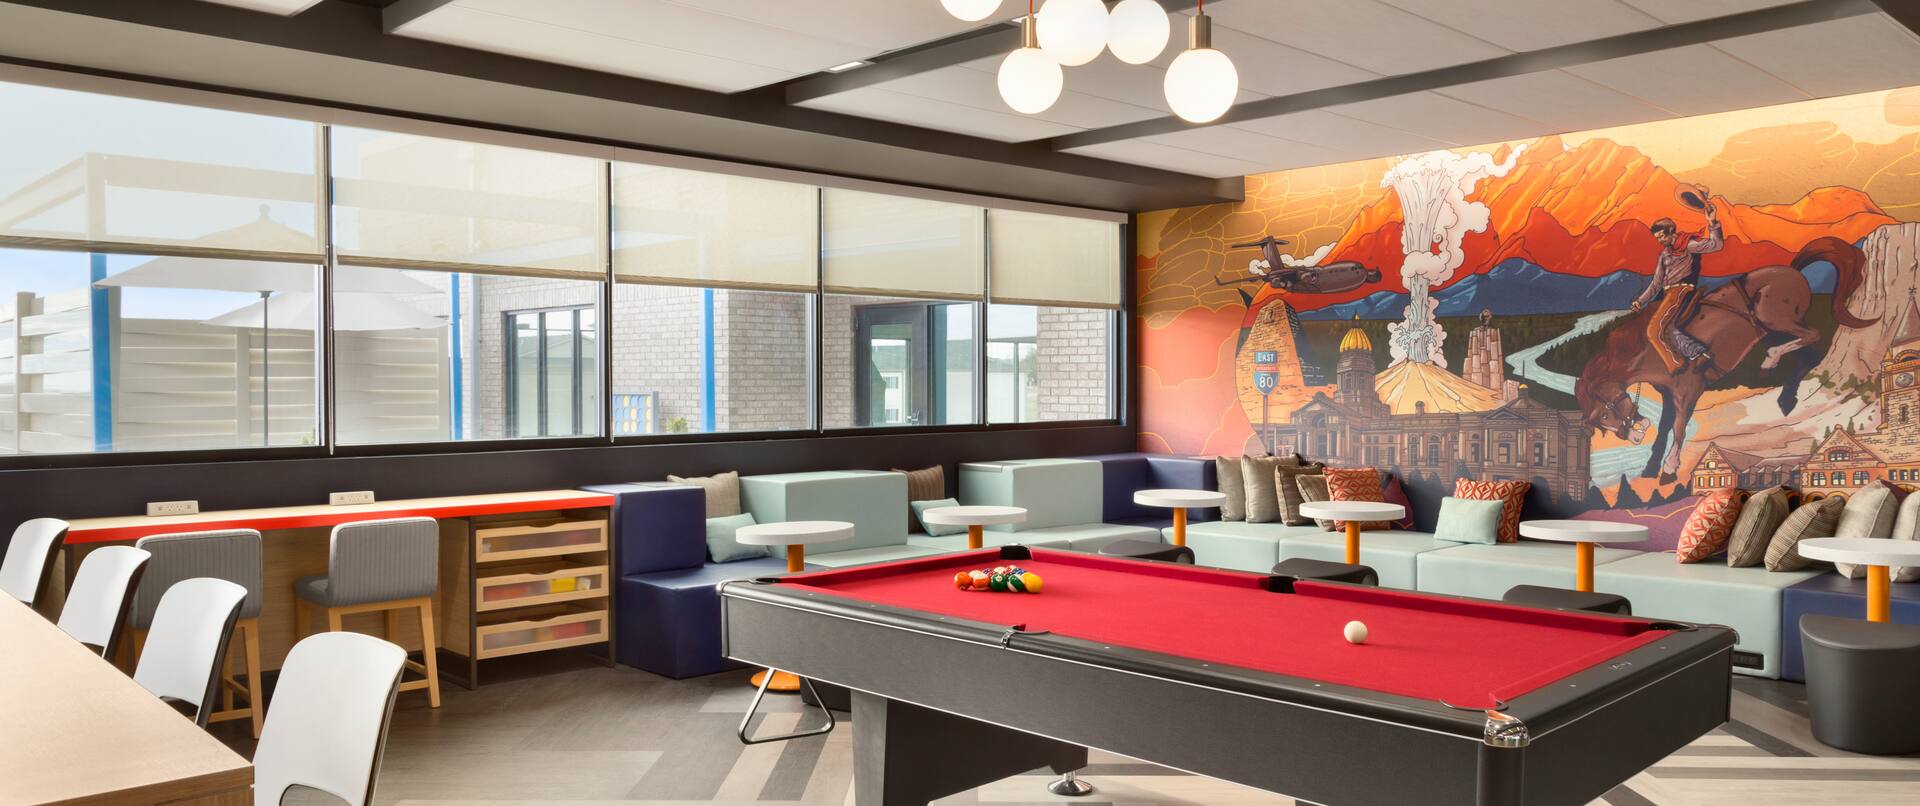 Hotel Billiards Room with Pool Table